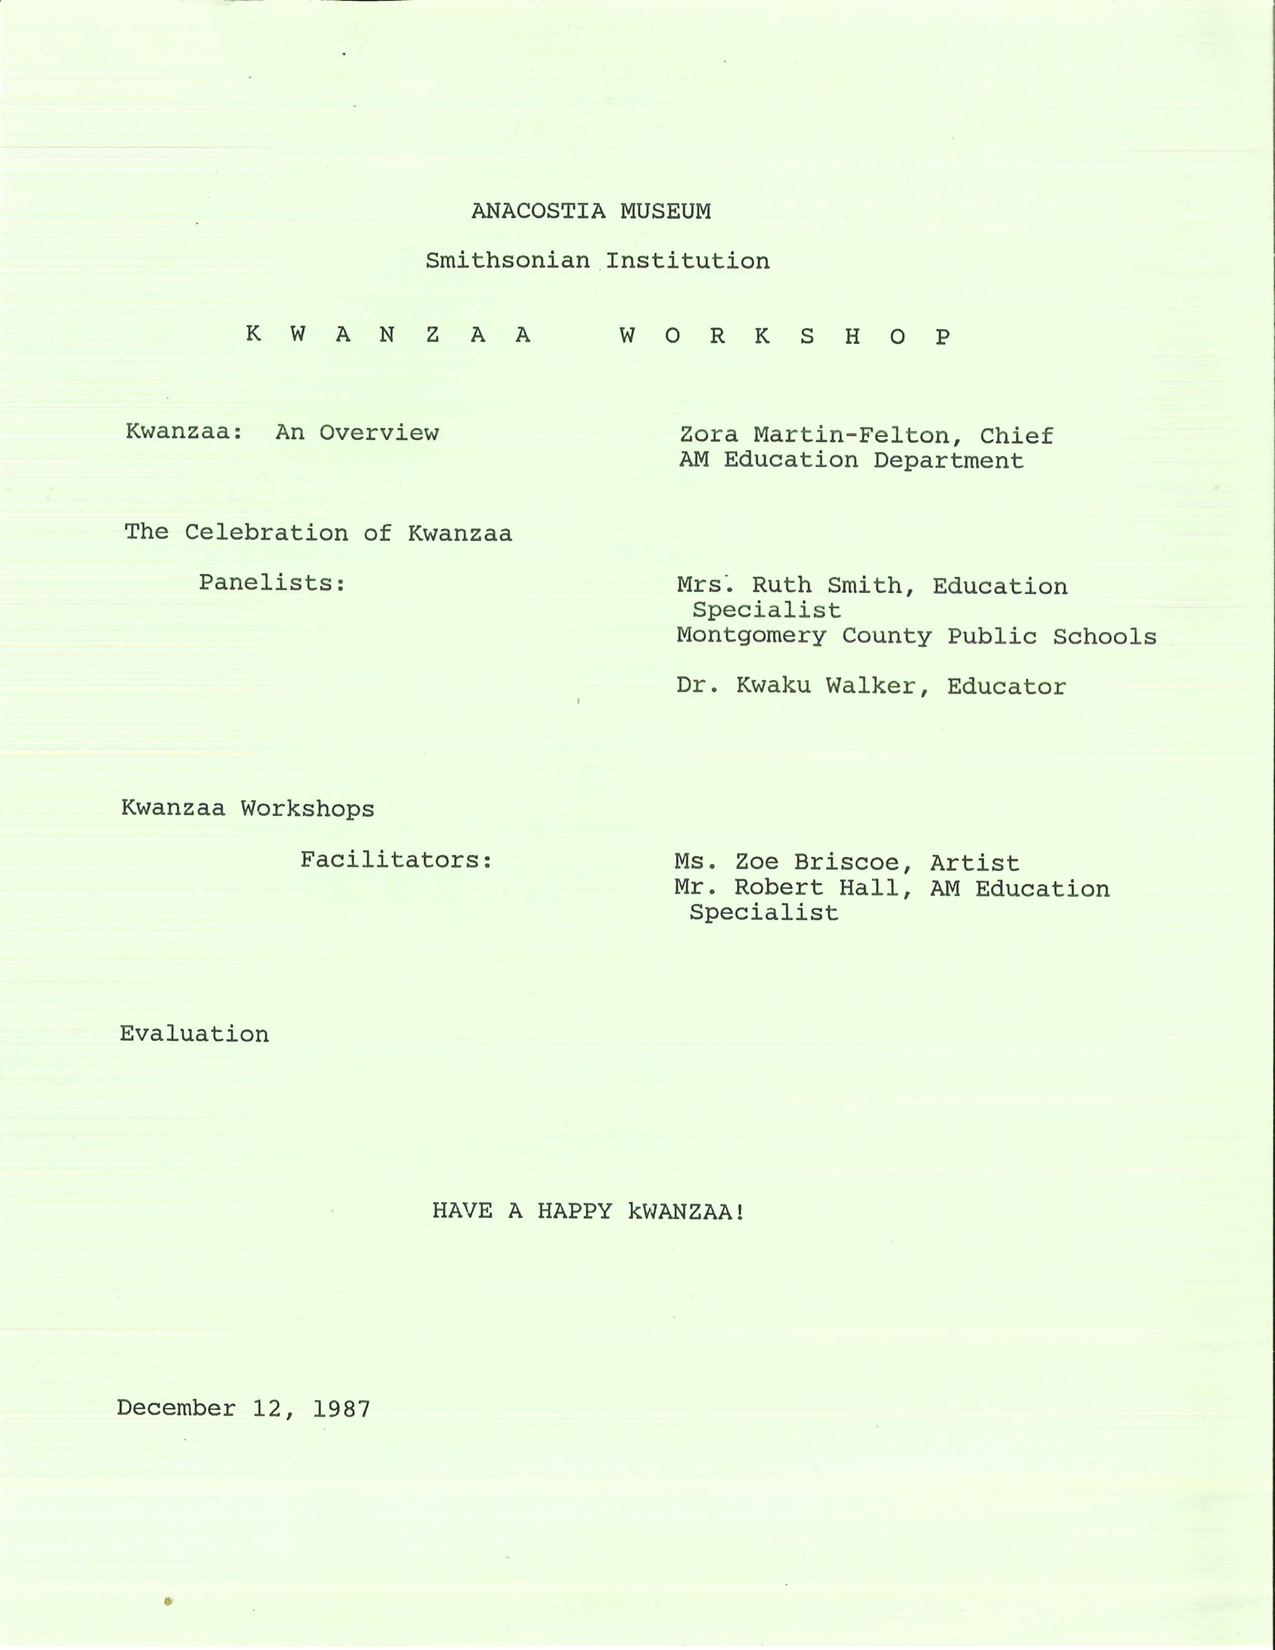 An agenda of people who were leading a workshop about Kwanzaa on December 12, 1987. Leaders include